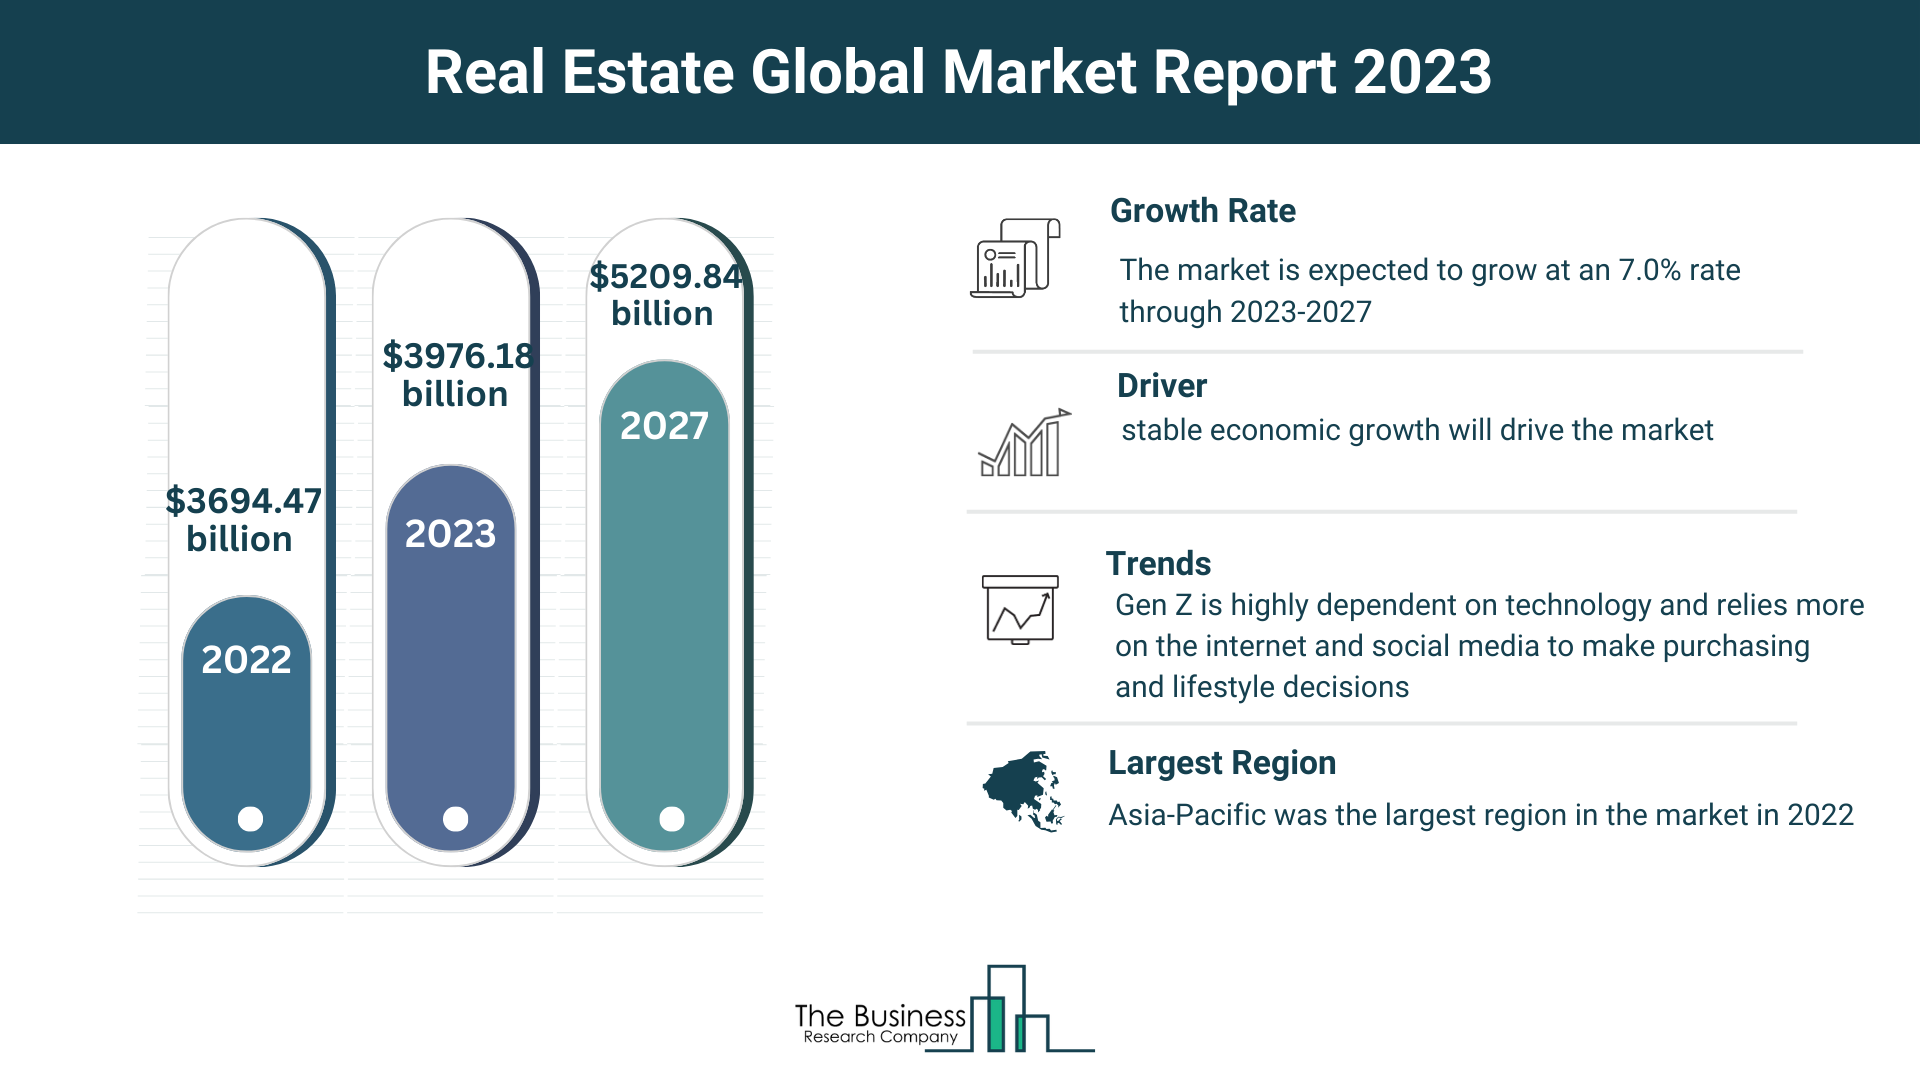 5 Key Takeaways From The Real Estate Market Report 2023